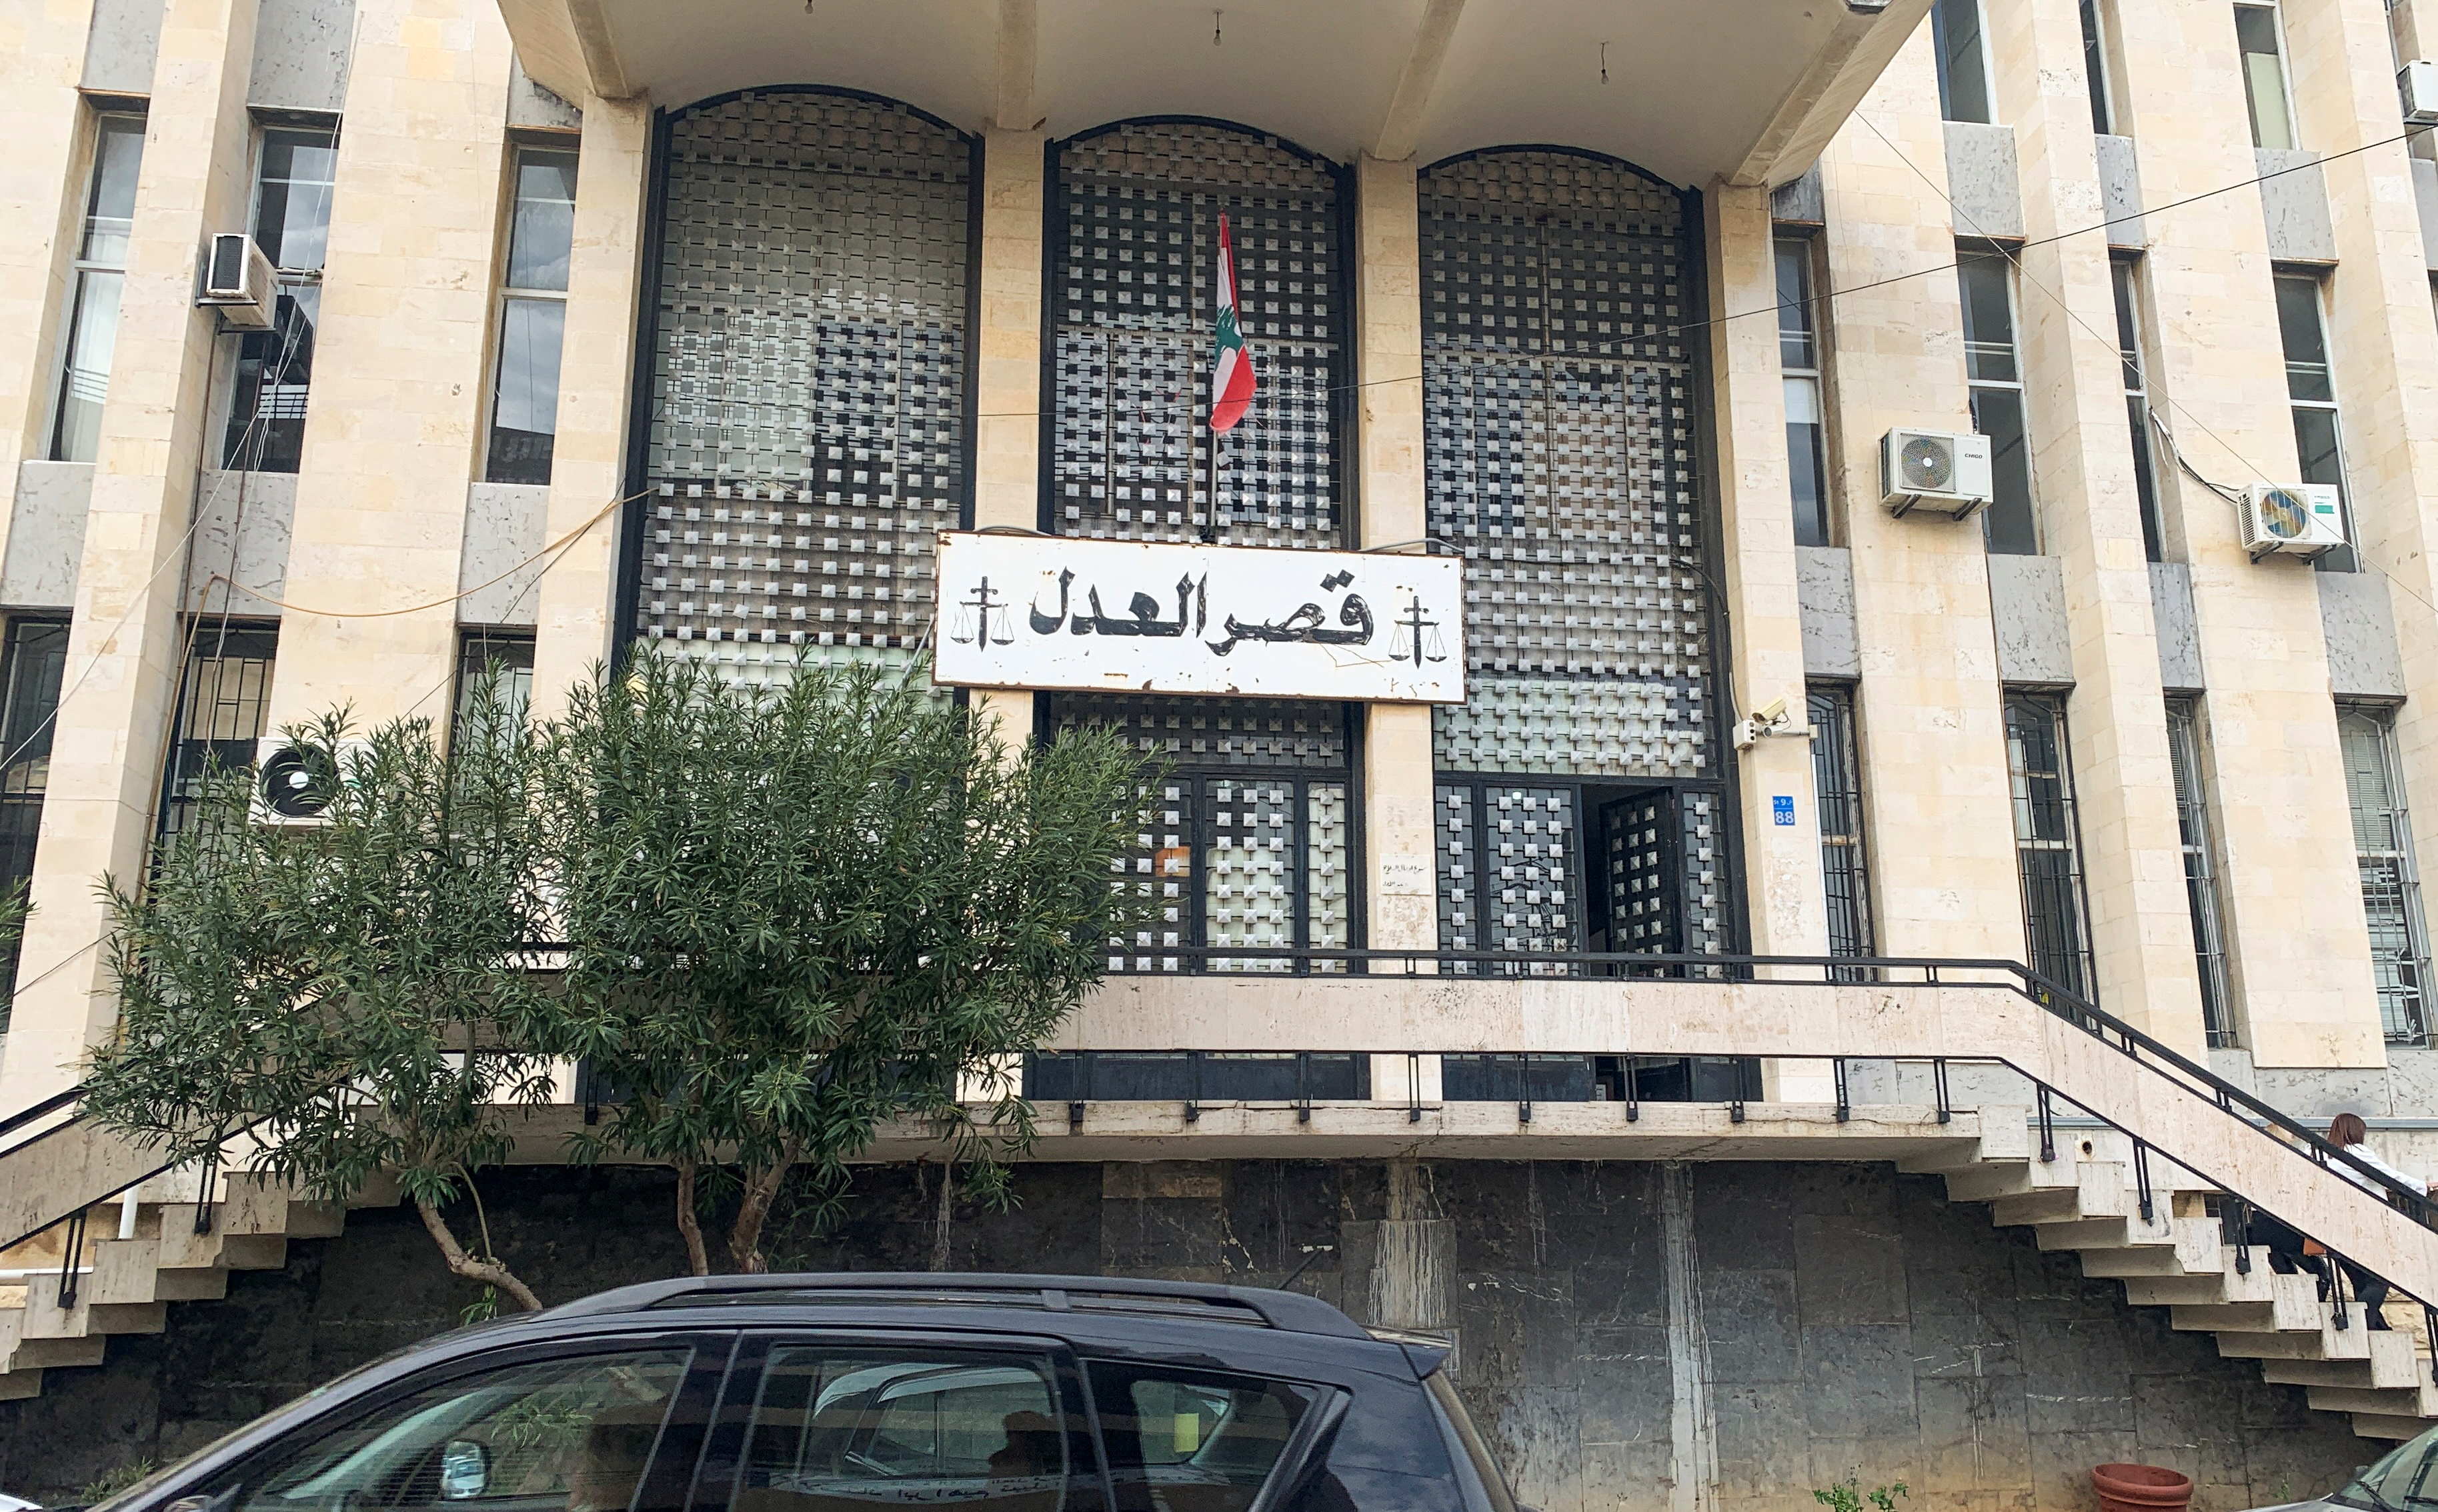 A view shows the exterior of the Justice Palace building where Raja Salameh, brother of central bank governor Riad Salameh is believed to have been arrested in Baabda